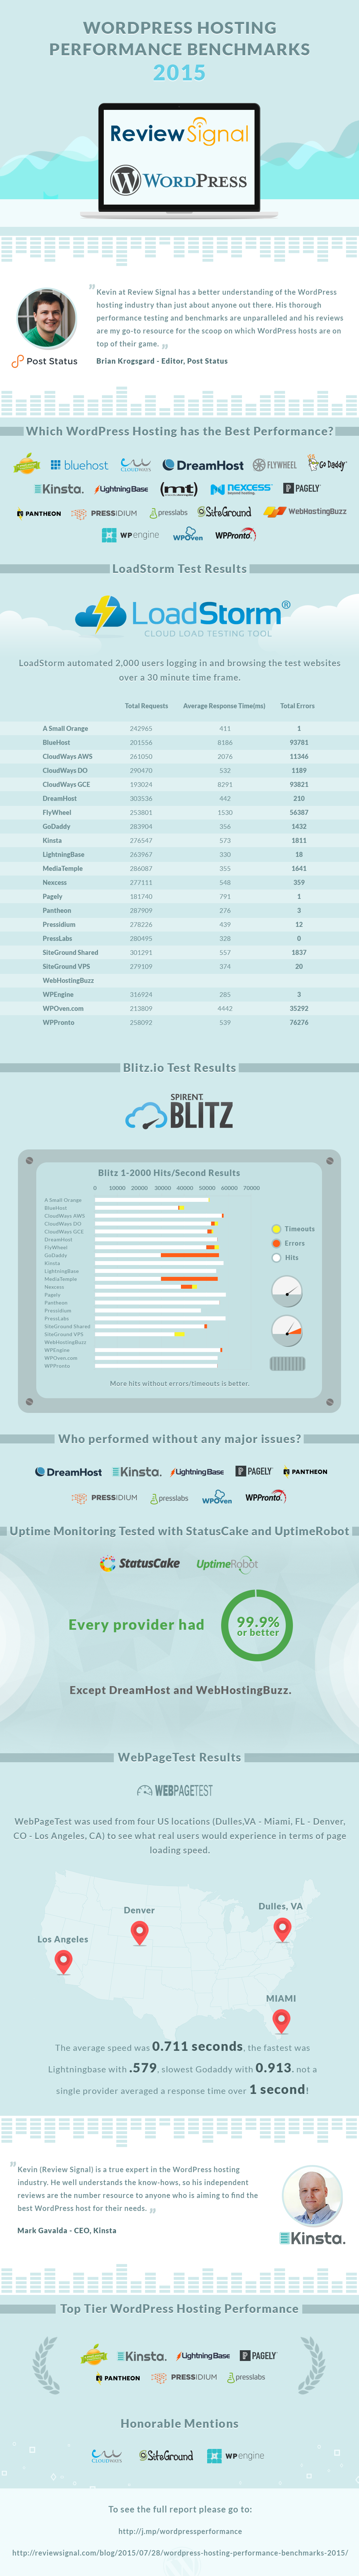 Infographic of WordPress Hosting Performance Benchmarks 2015 Edition